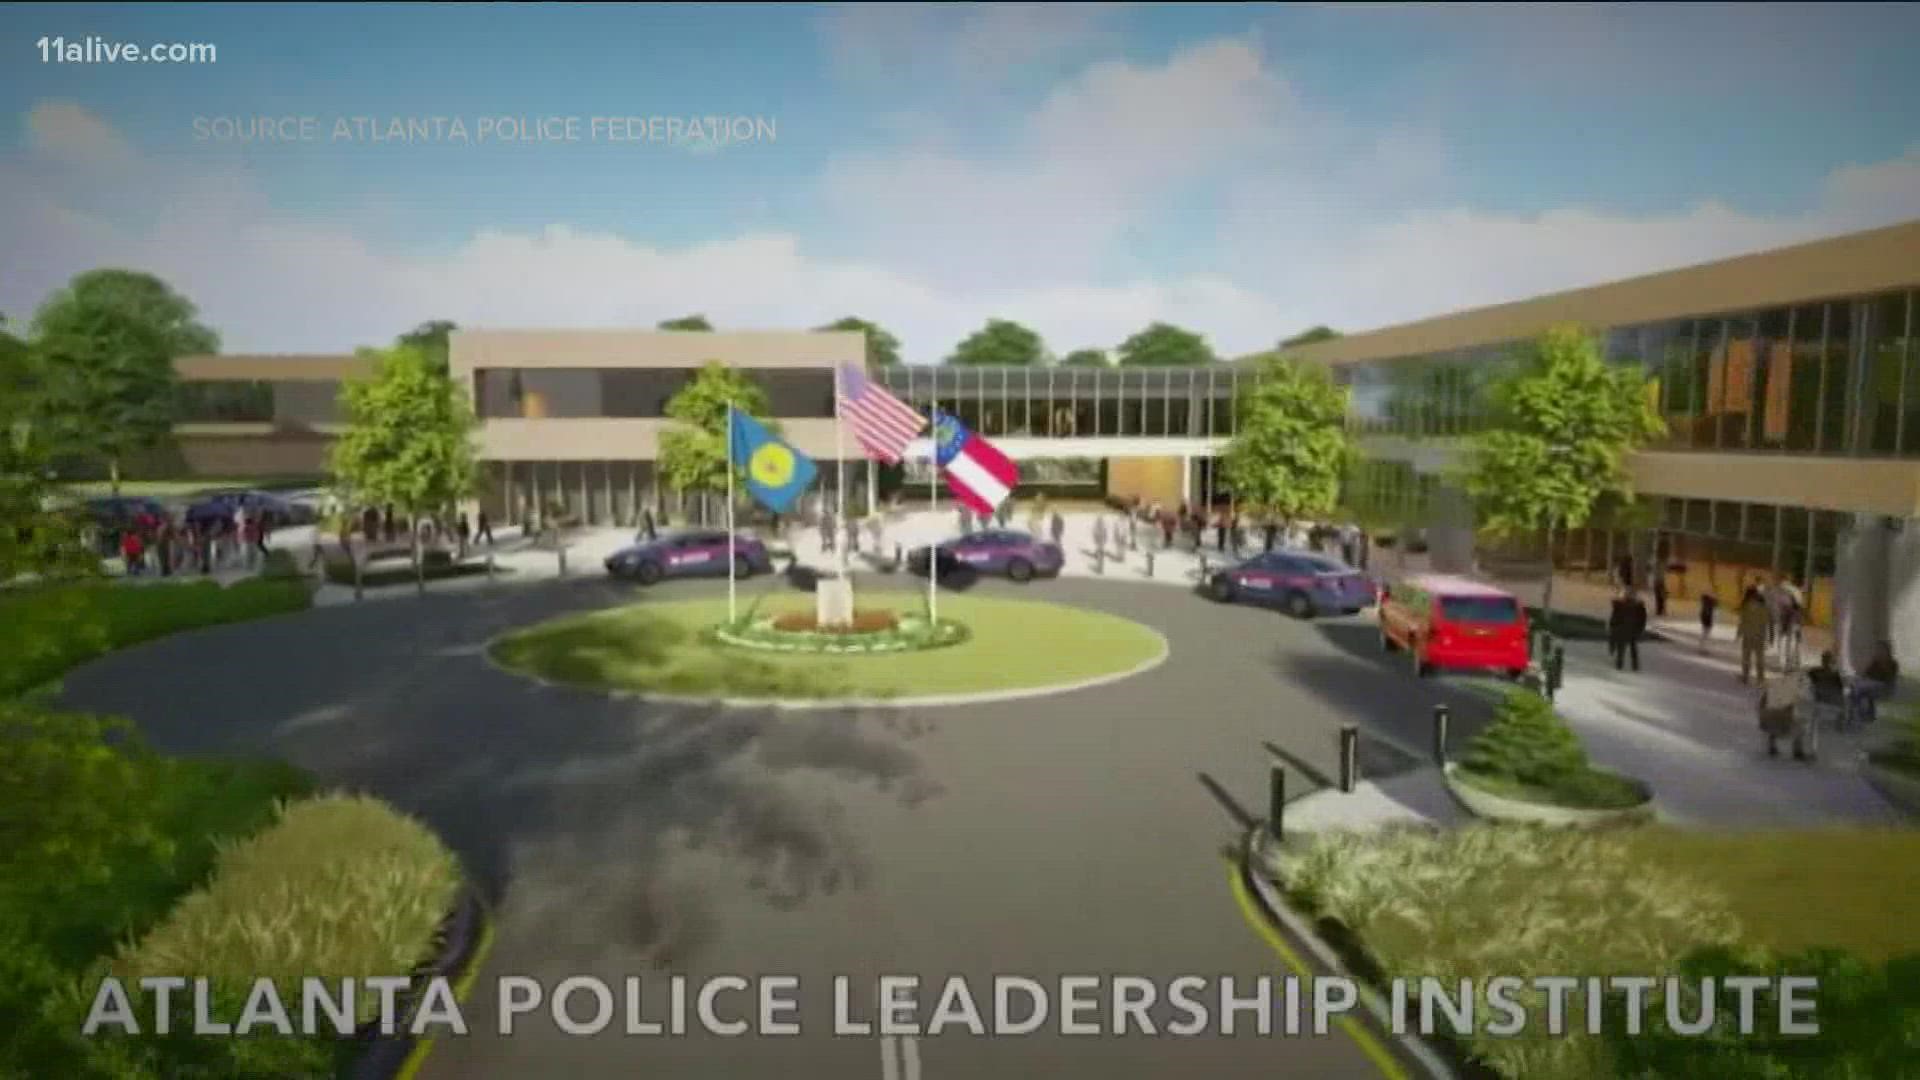 City officials hope to open the new police and fire training facility in two years.